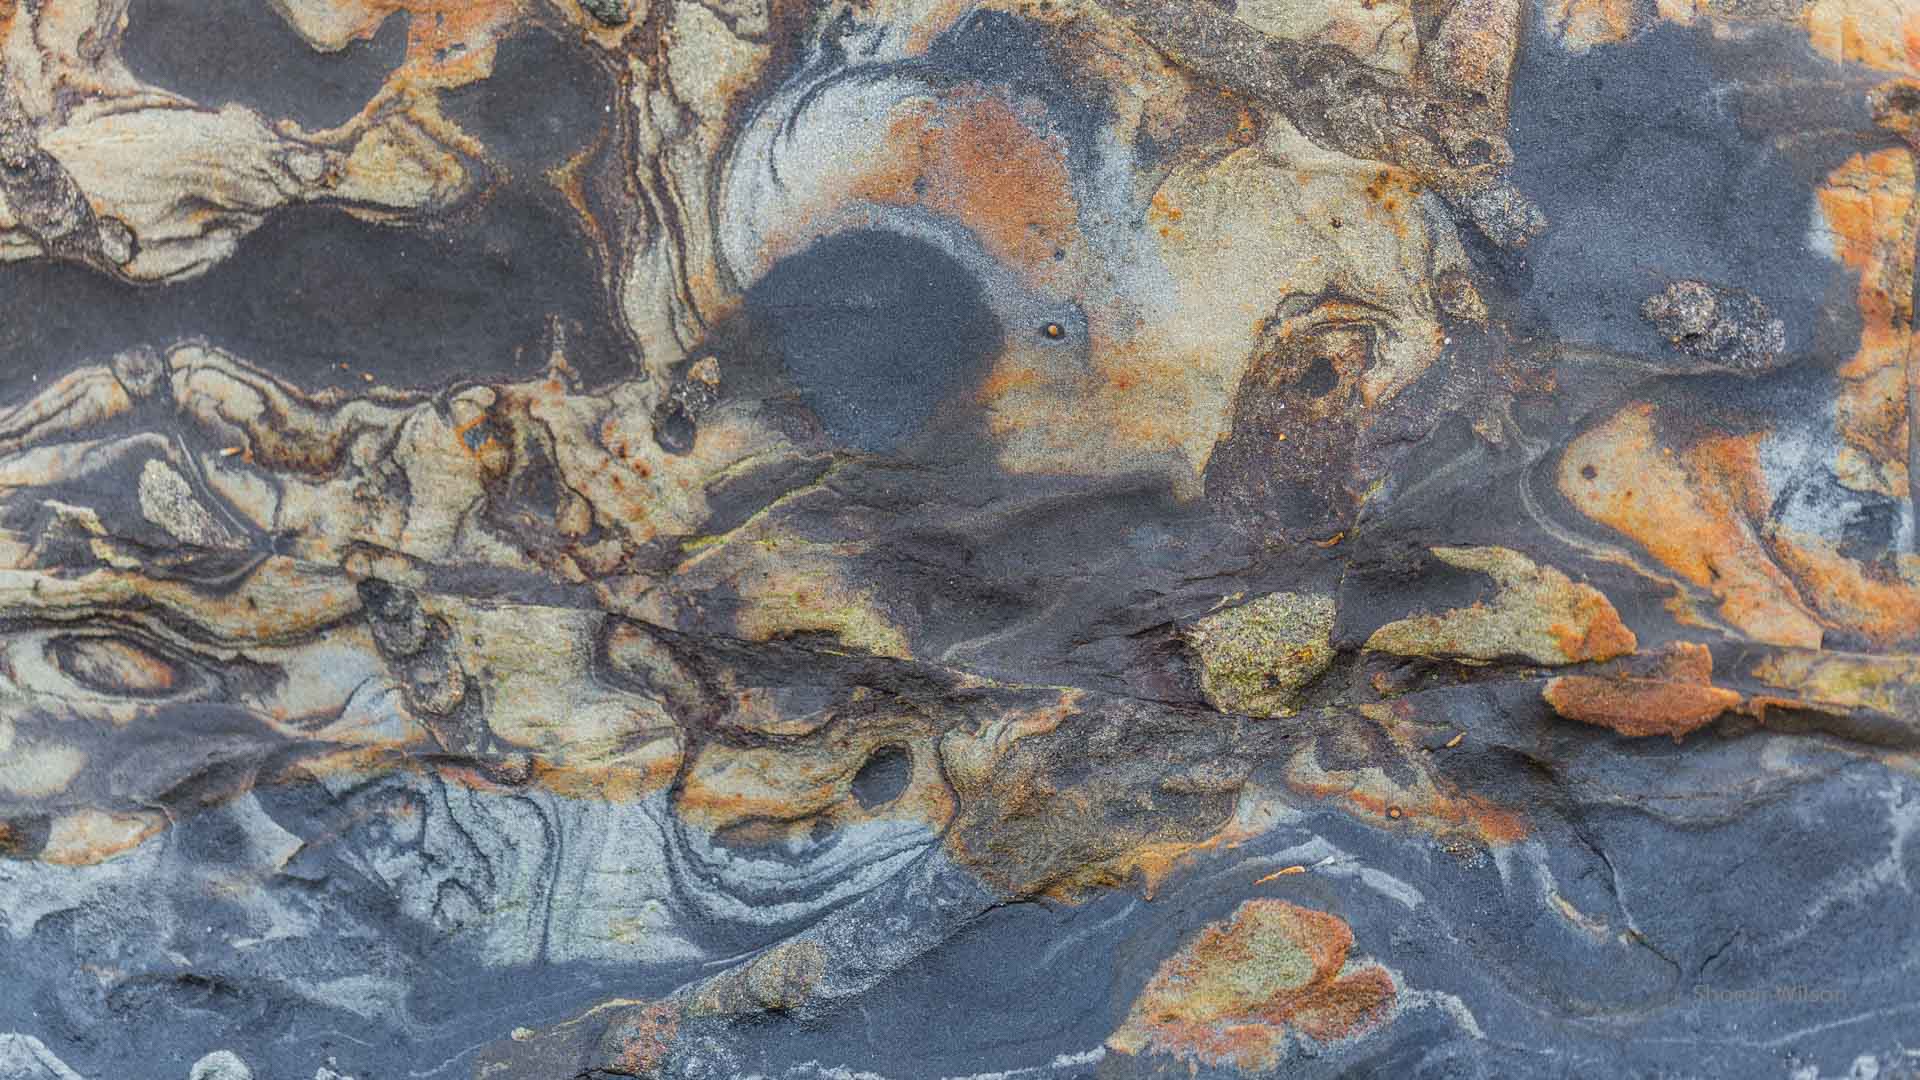 colorful swirling patters in a rock face